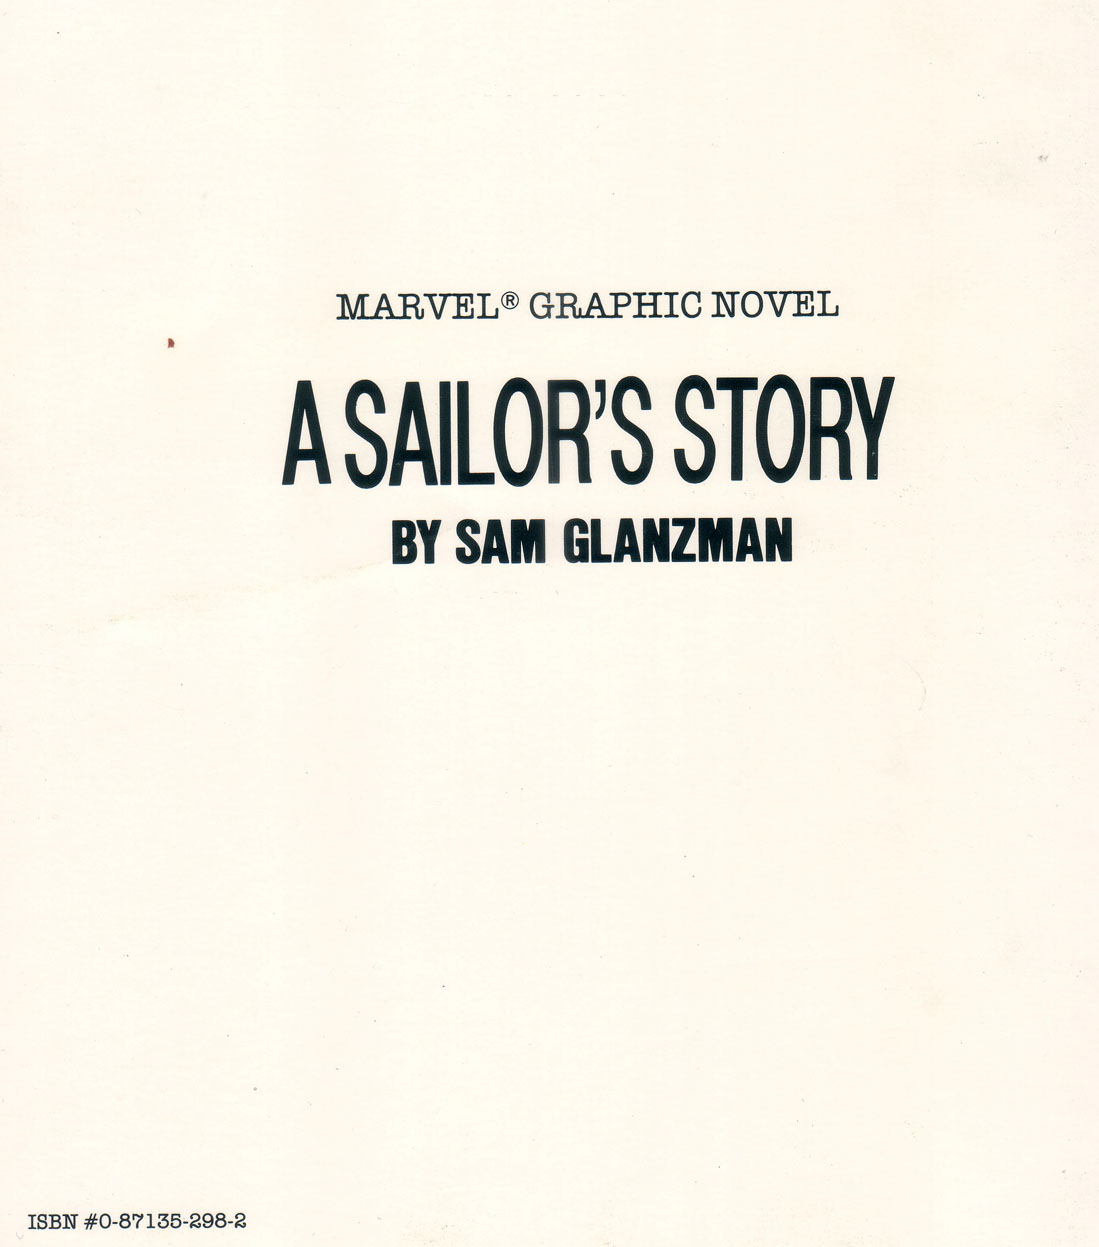 Read online Marvel Graphic Novel comic -  Issue #30 - A Sailor's Story - 67